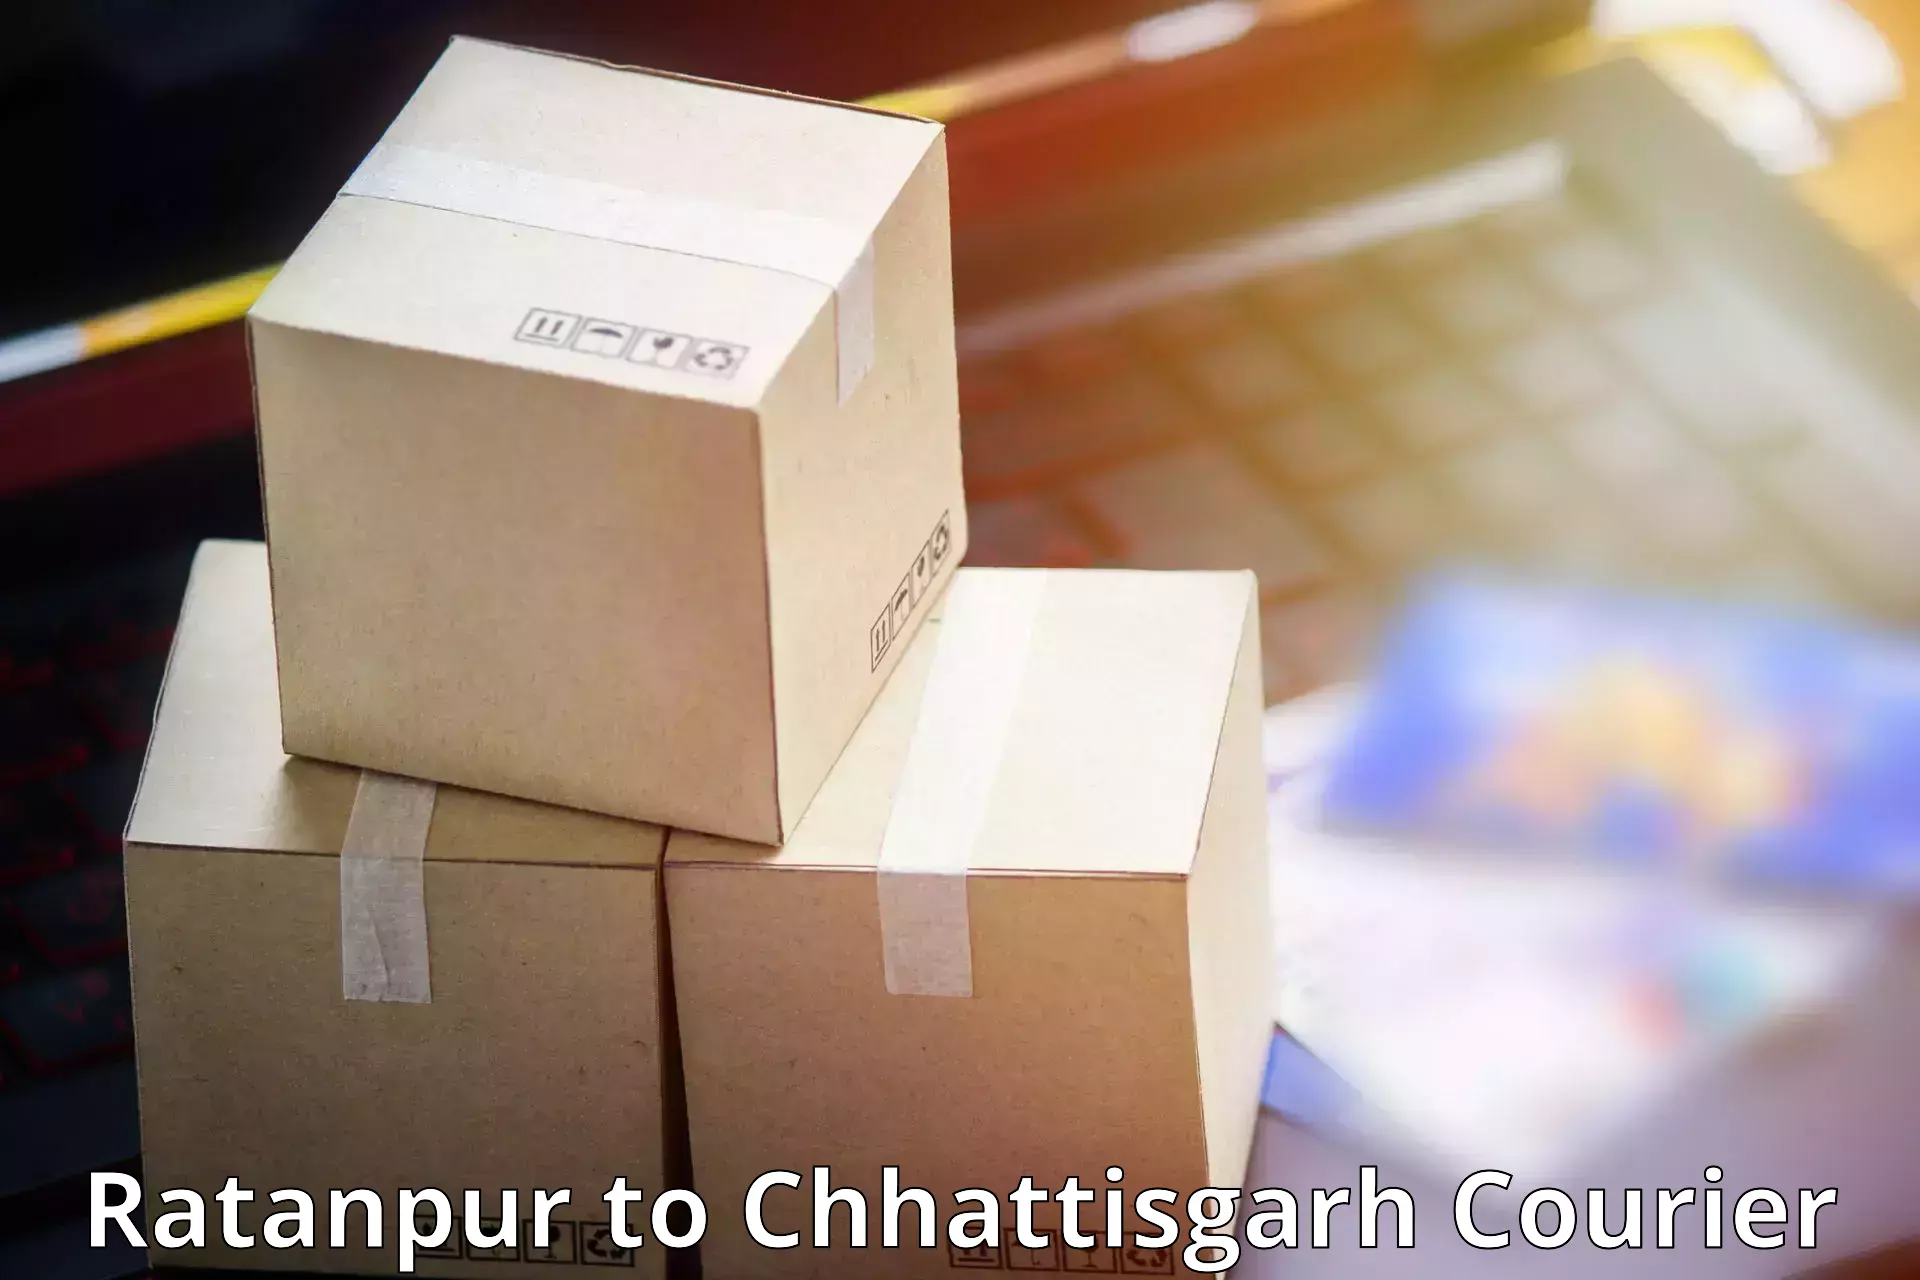 Professional courier handling Ratanpur to Charama